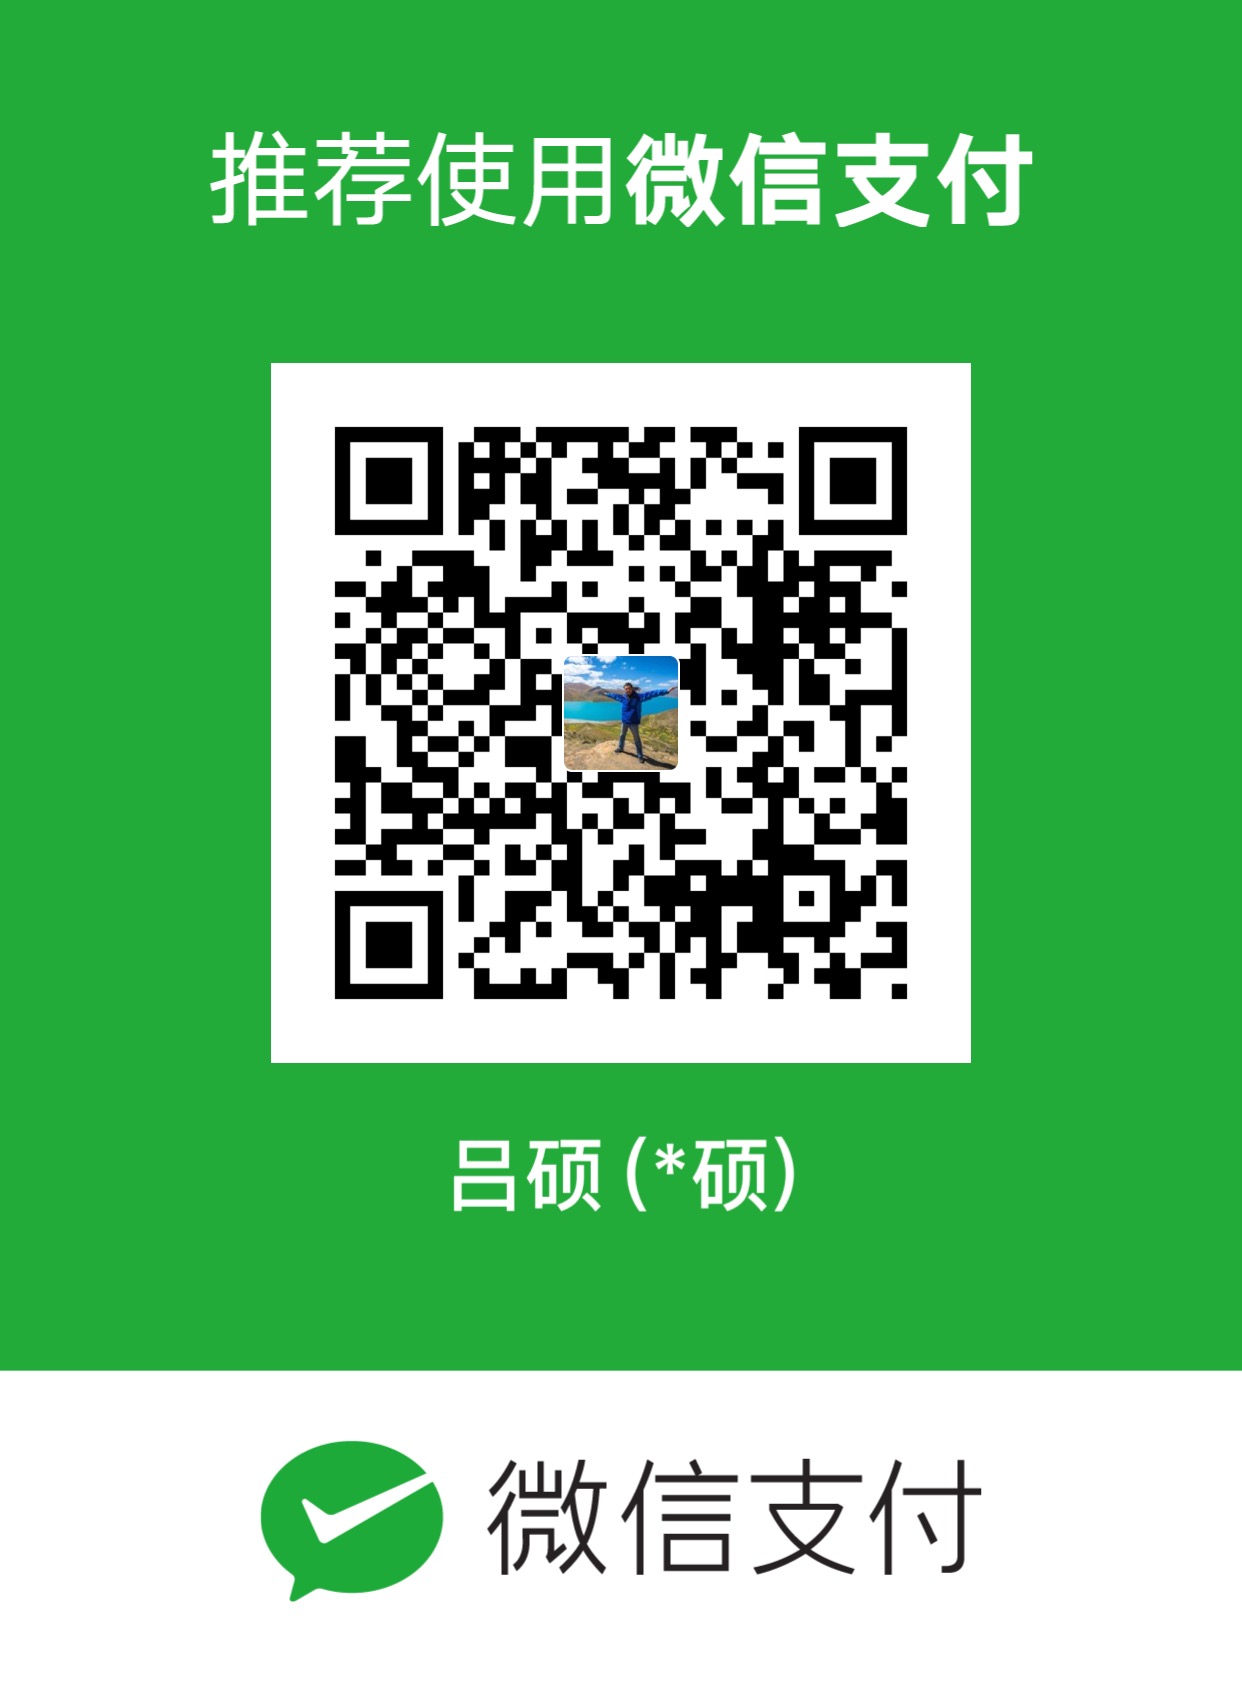 Shuo Lv WeChat Pay